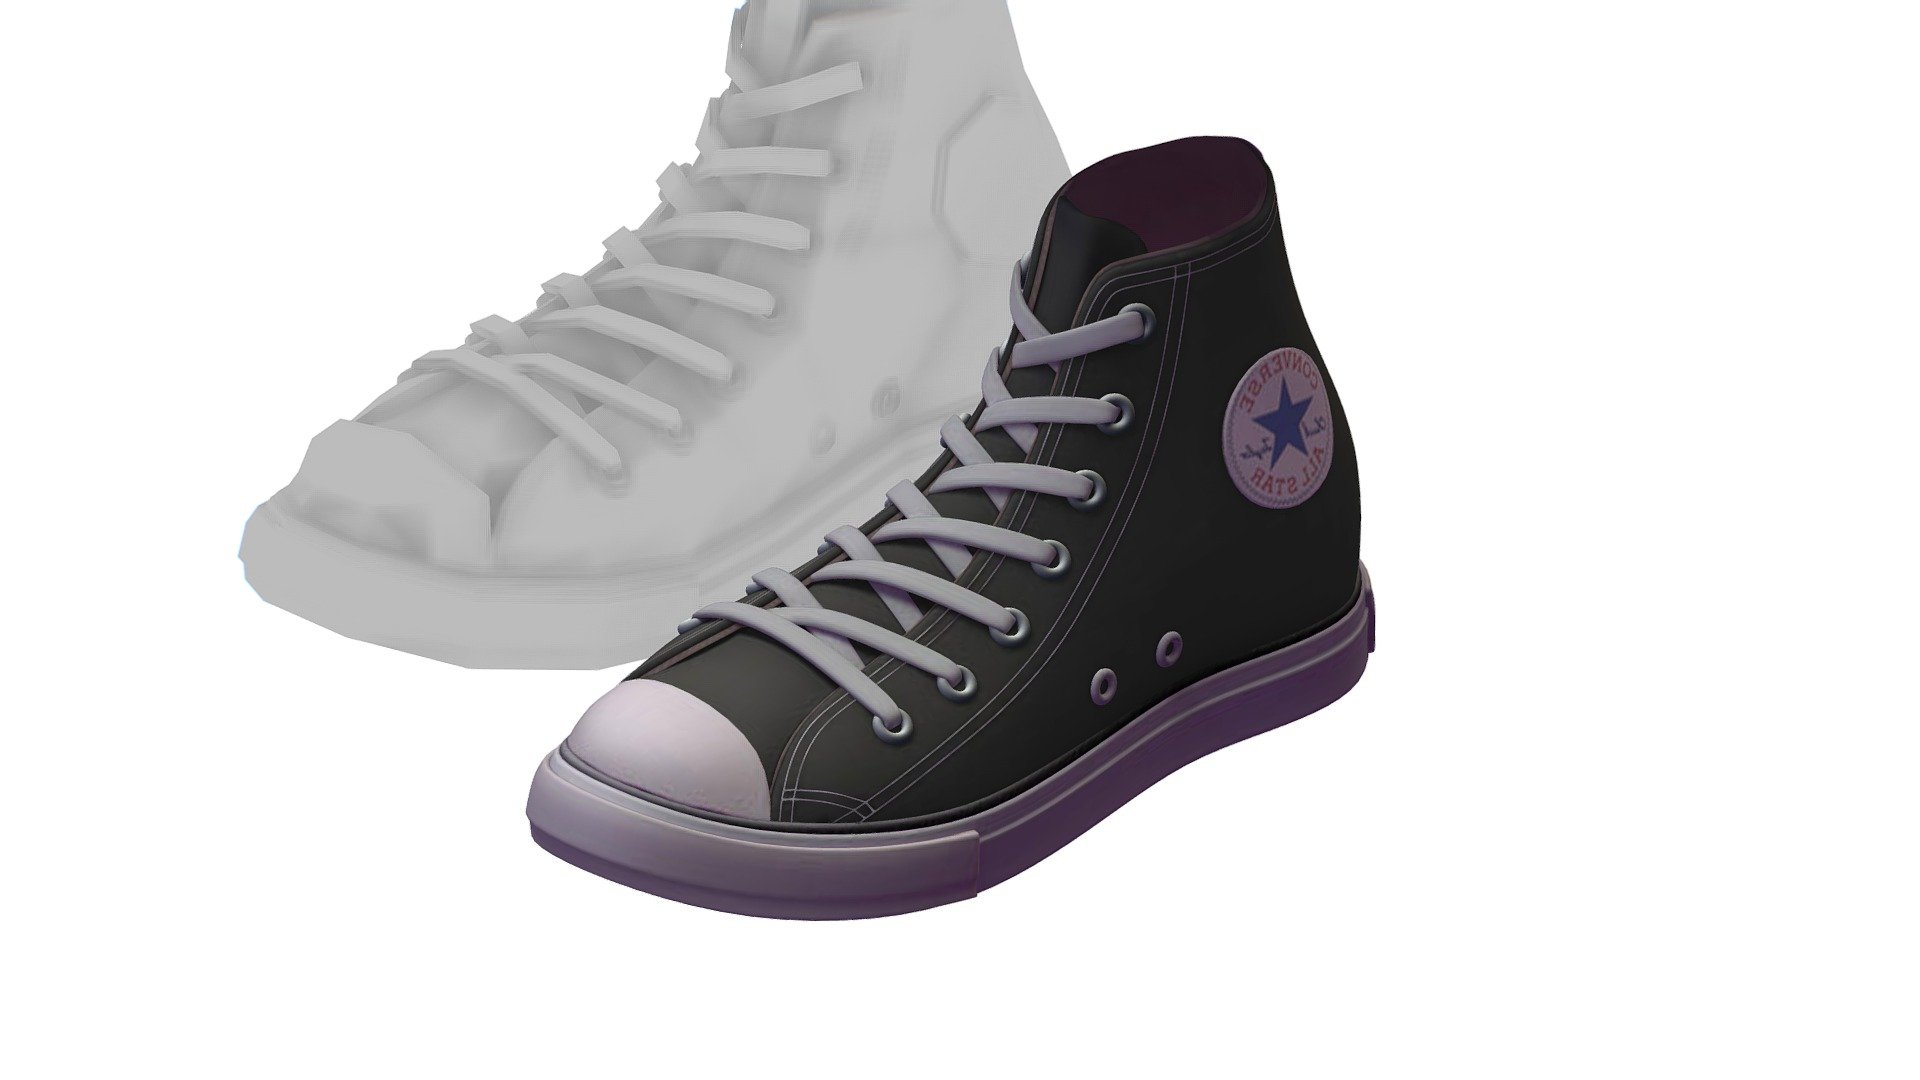 Cartoon High Poly Subdivision Sneakers

No HDRI map, No Light, No material settings - only Diffuse/Color Map Texture (4000x4000)

More information about the 3D model: please use the Sketchfab Model Inspector - Key (i) - Cartoon High Poly Subdivision Sneakers - Buy Royalty Free 3D model by Oleg Shuldiakov (@olegshuldiakov) 3d model